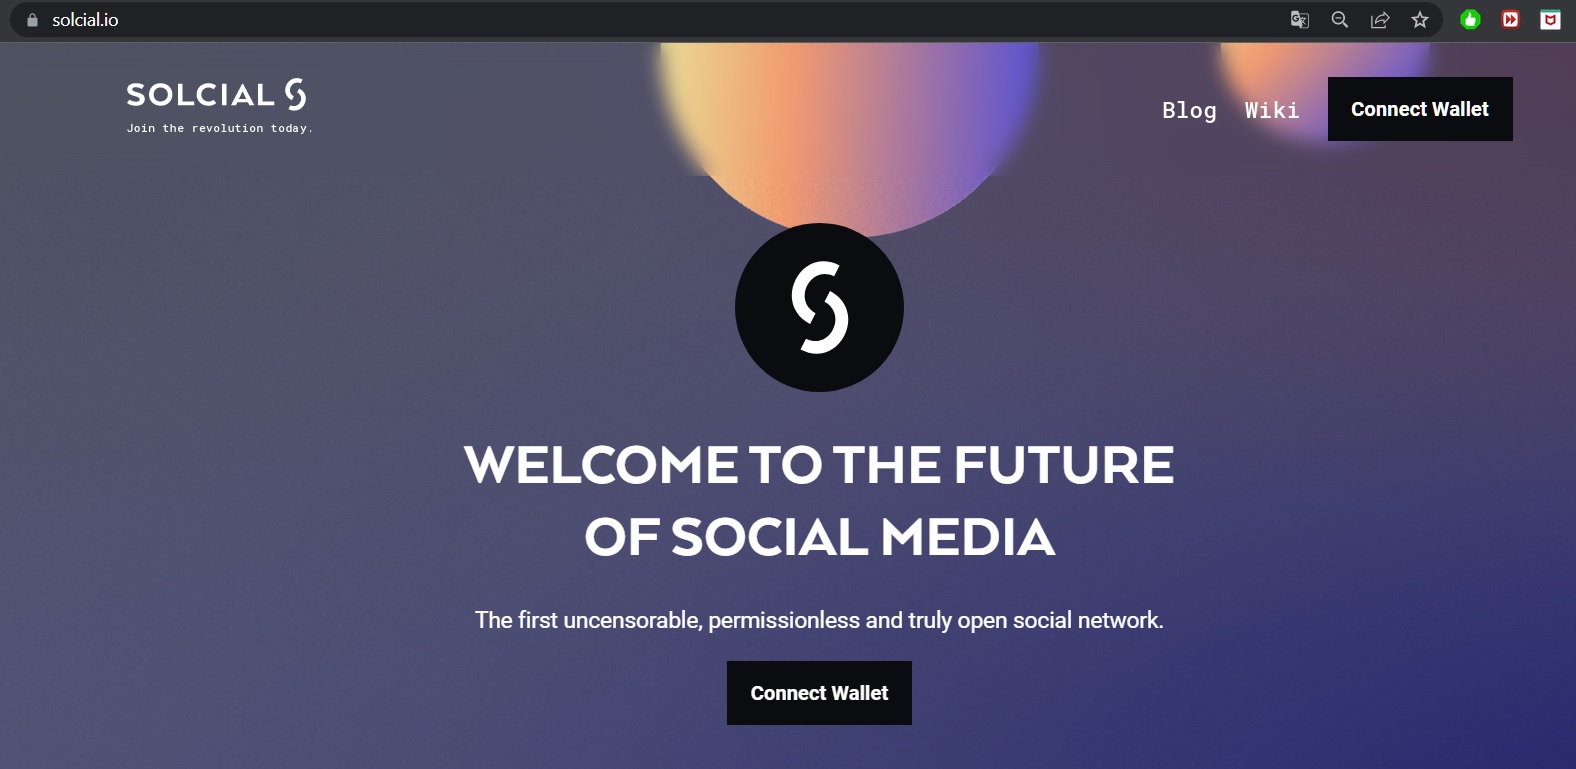 @bizzyn/overview-of-the-new-social-network-solcial